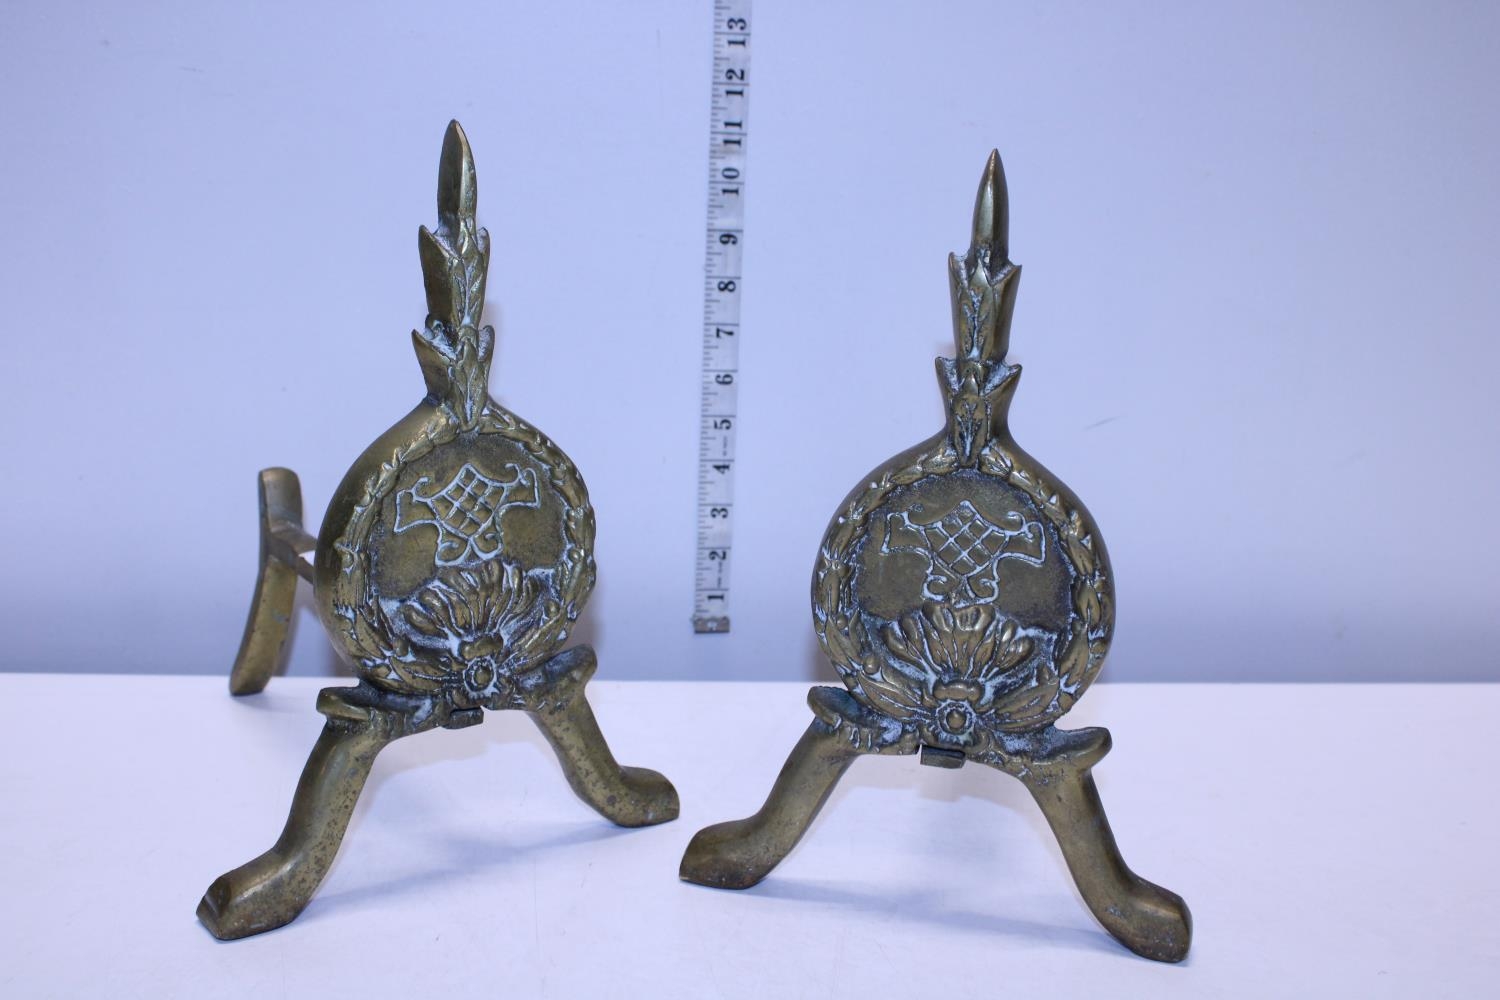 A pair of antique heavy brass fire dogs